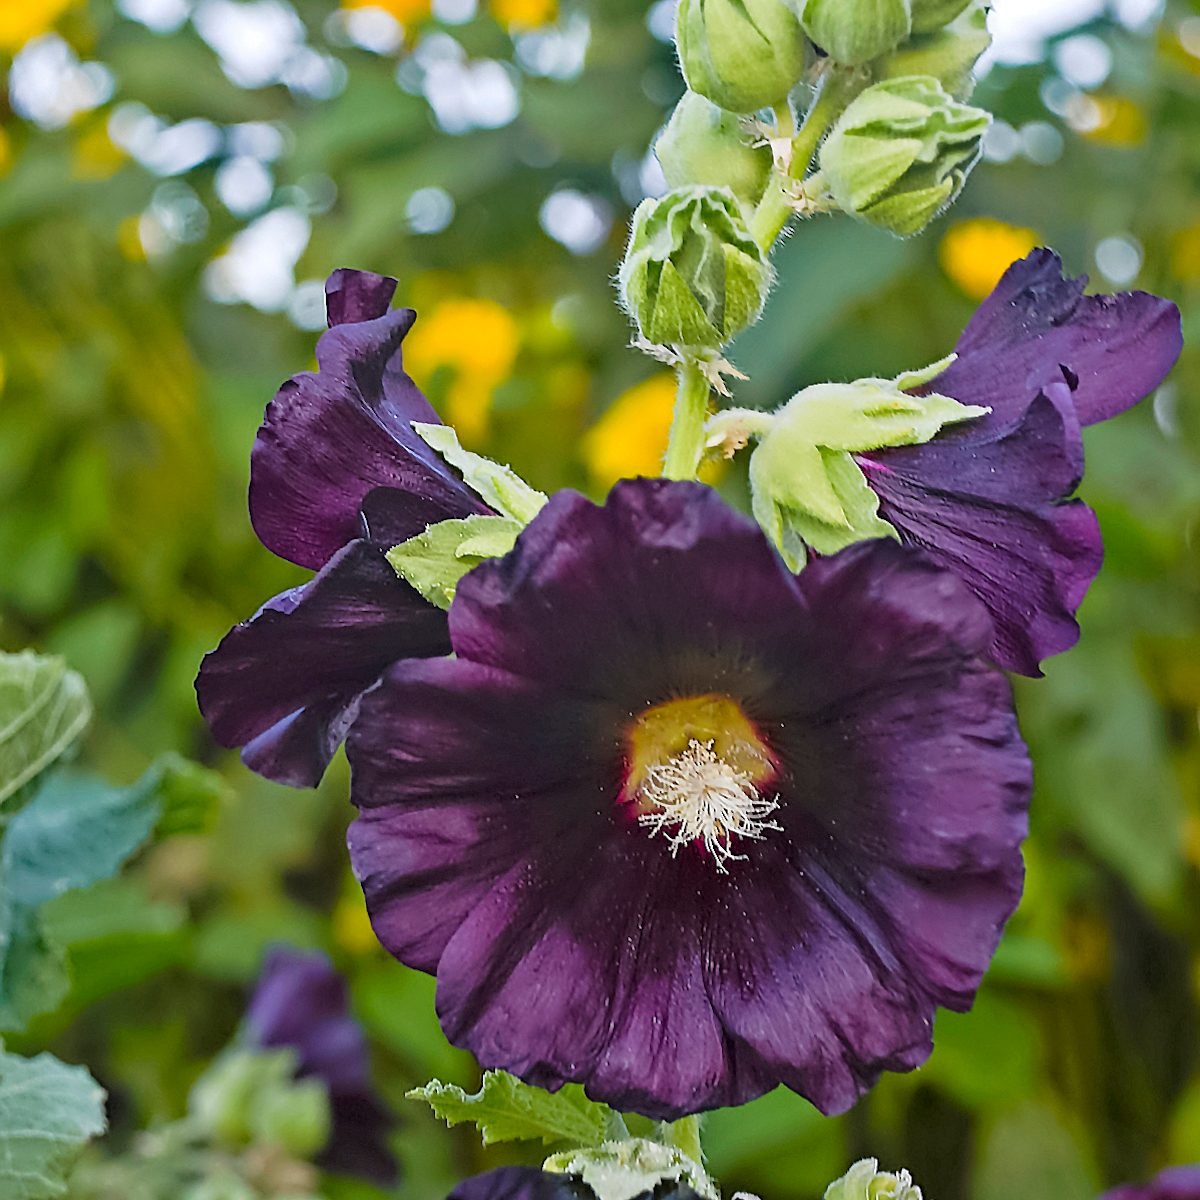 Top 10 Dark Colored Flowers That Are Almost Black - Birds and Blooms